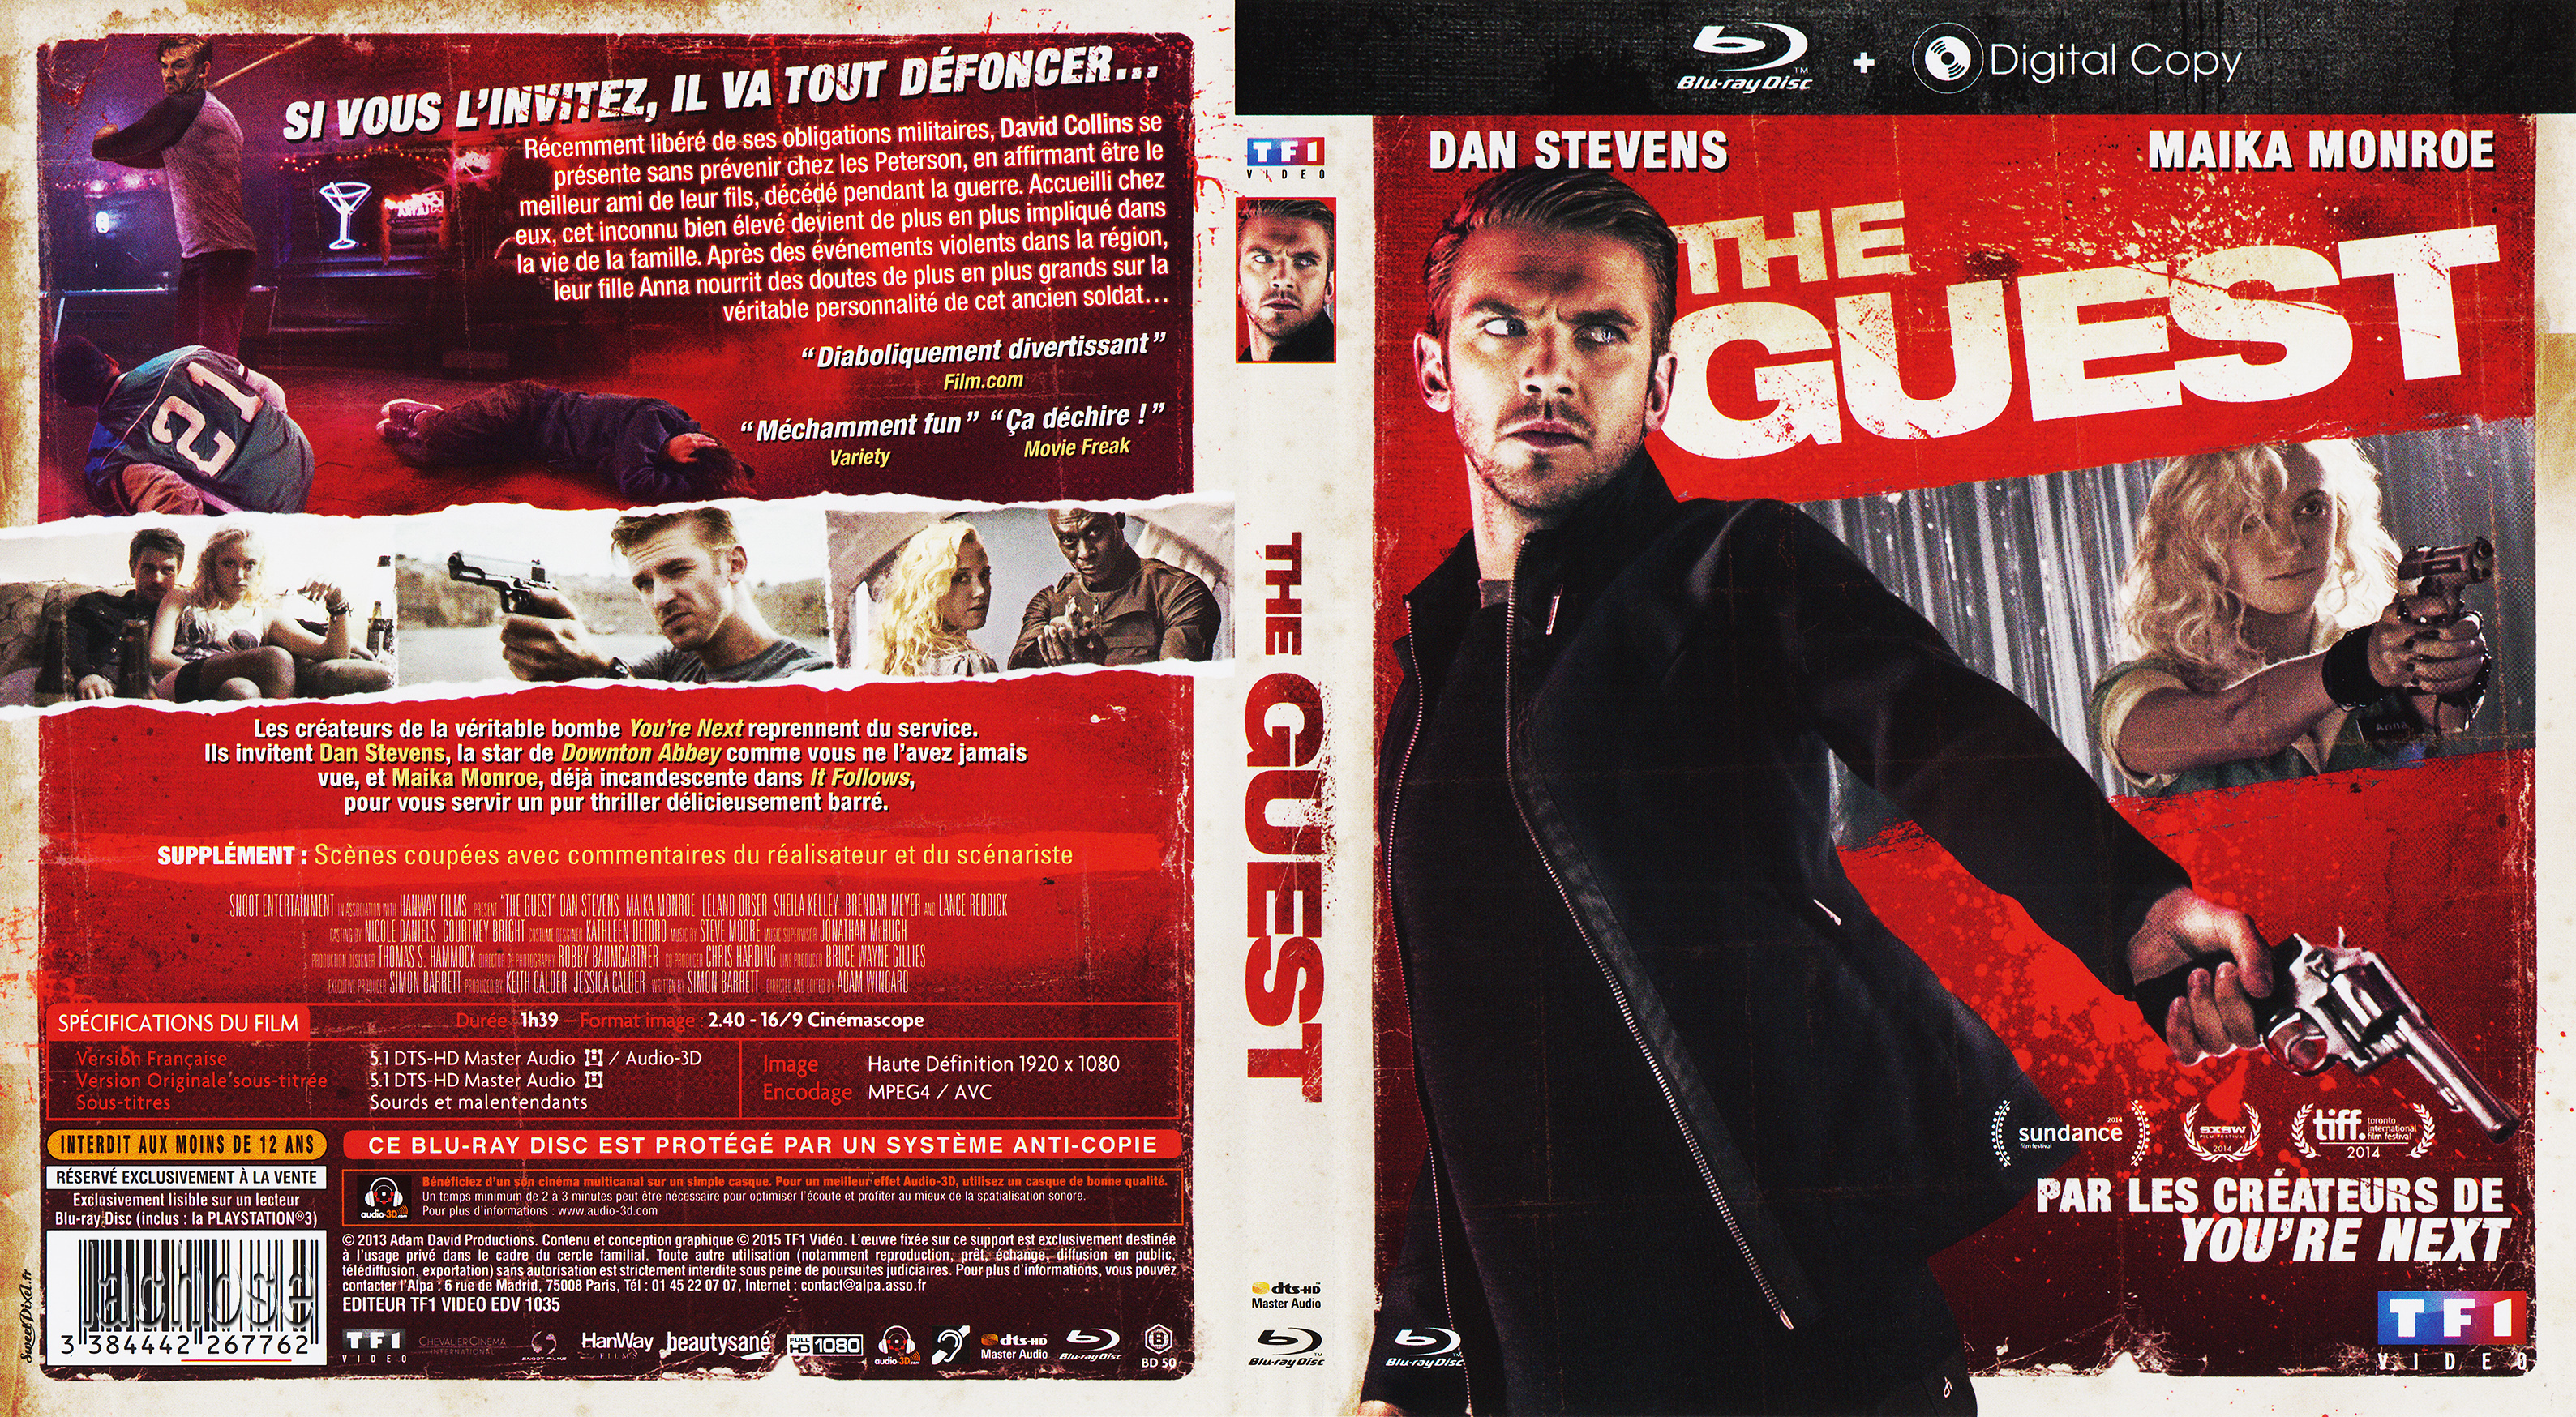 Jaquette DVD The guest (BLU-RAY)